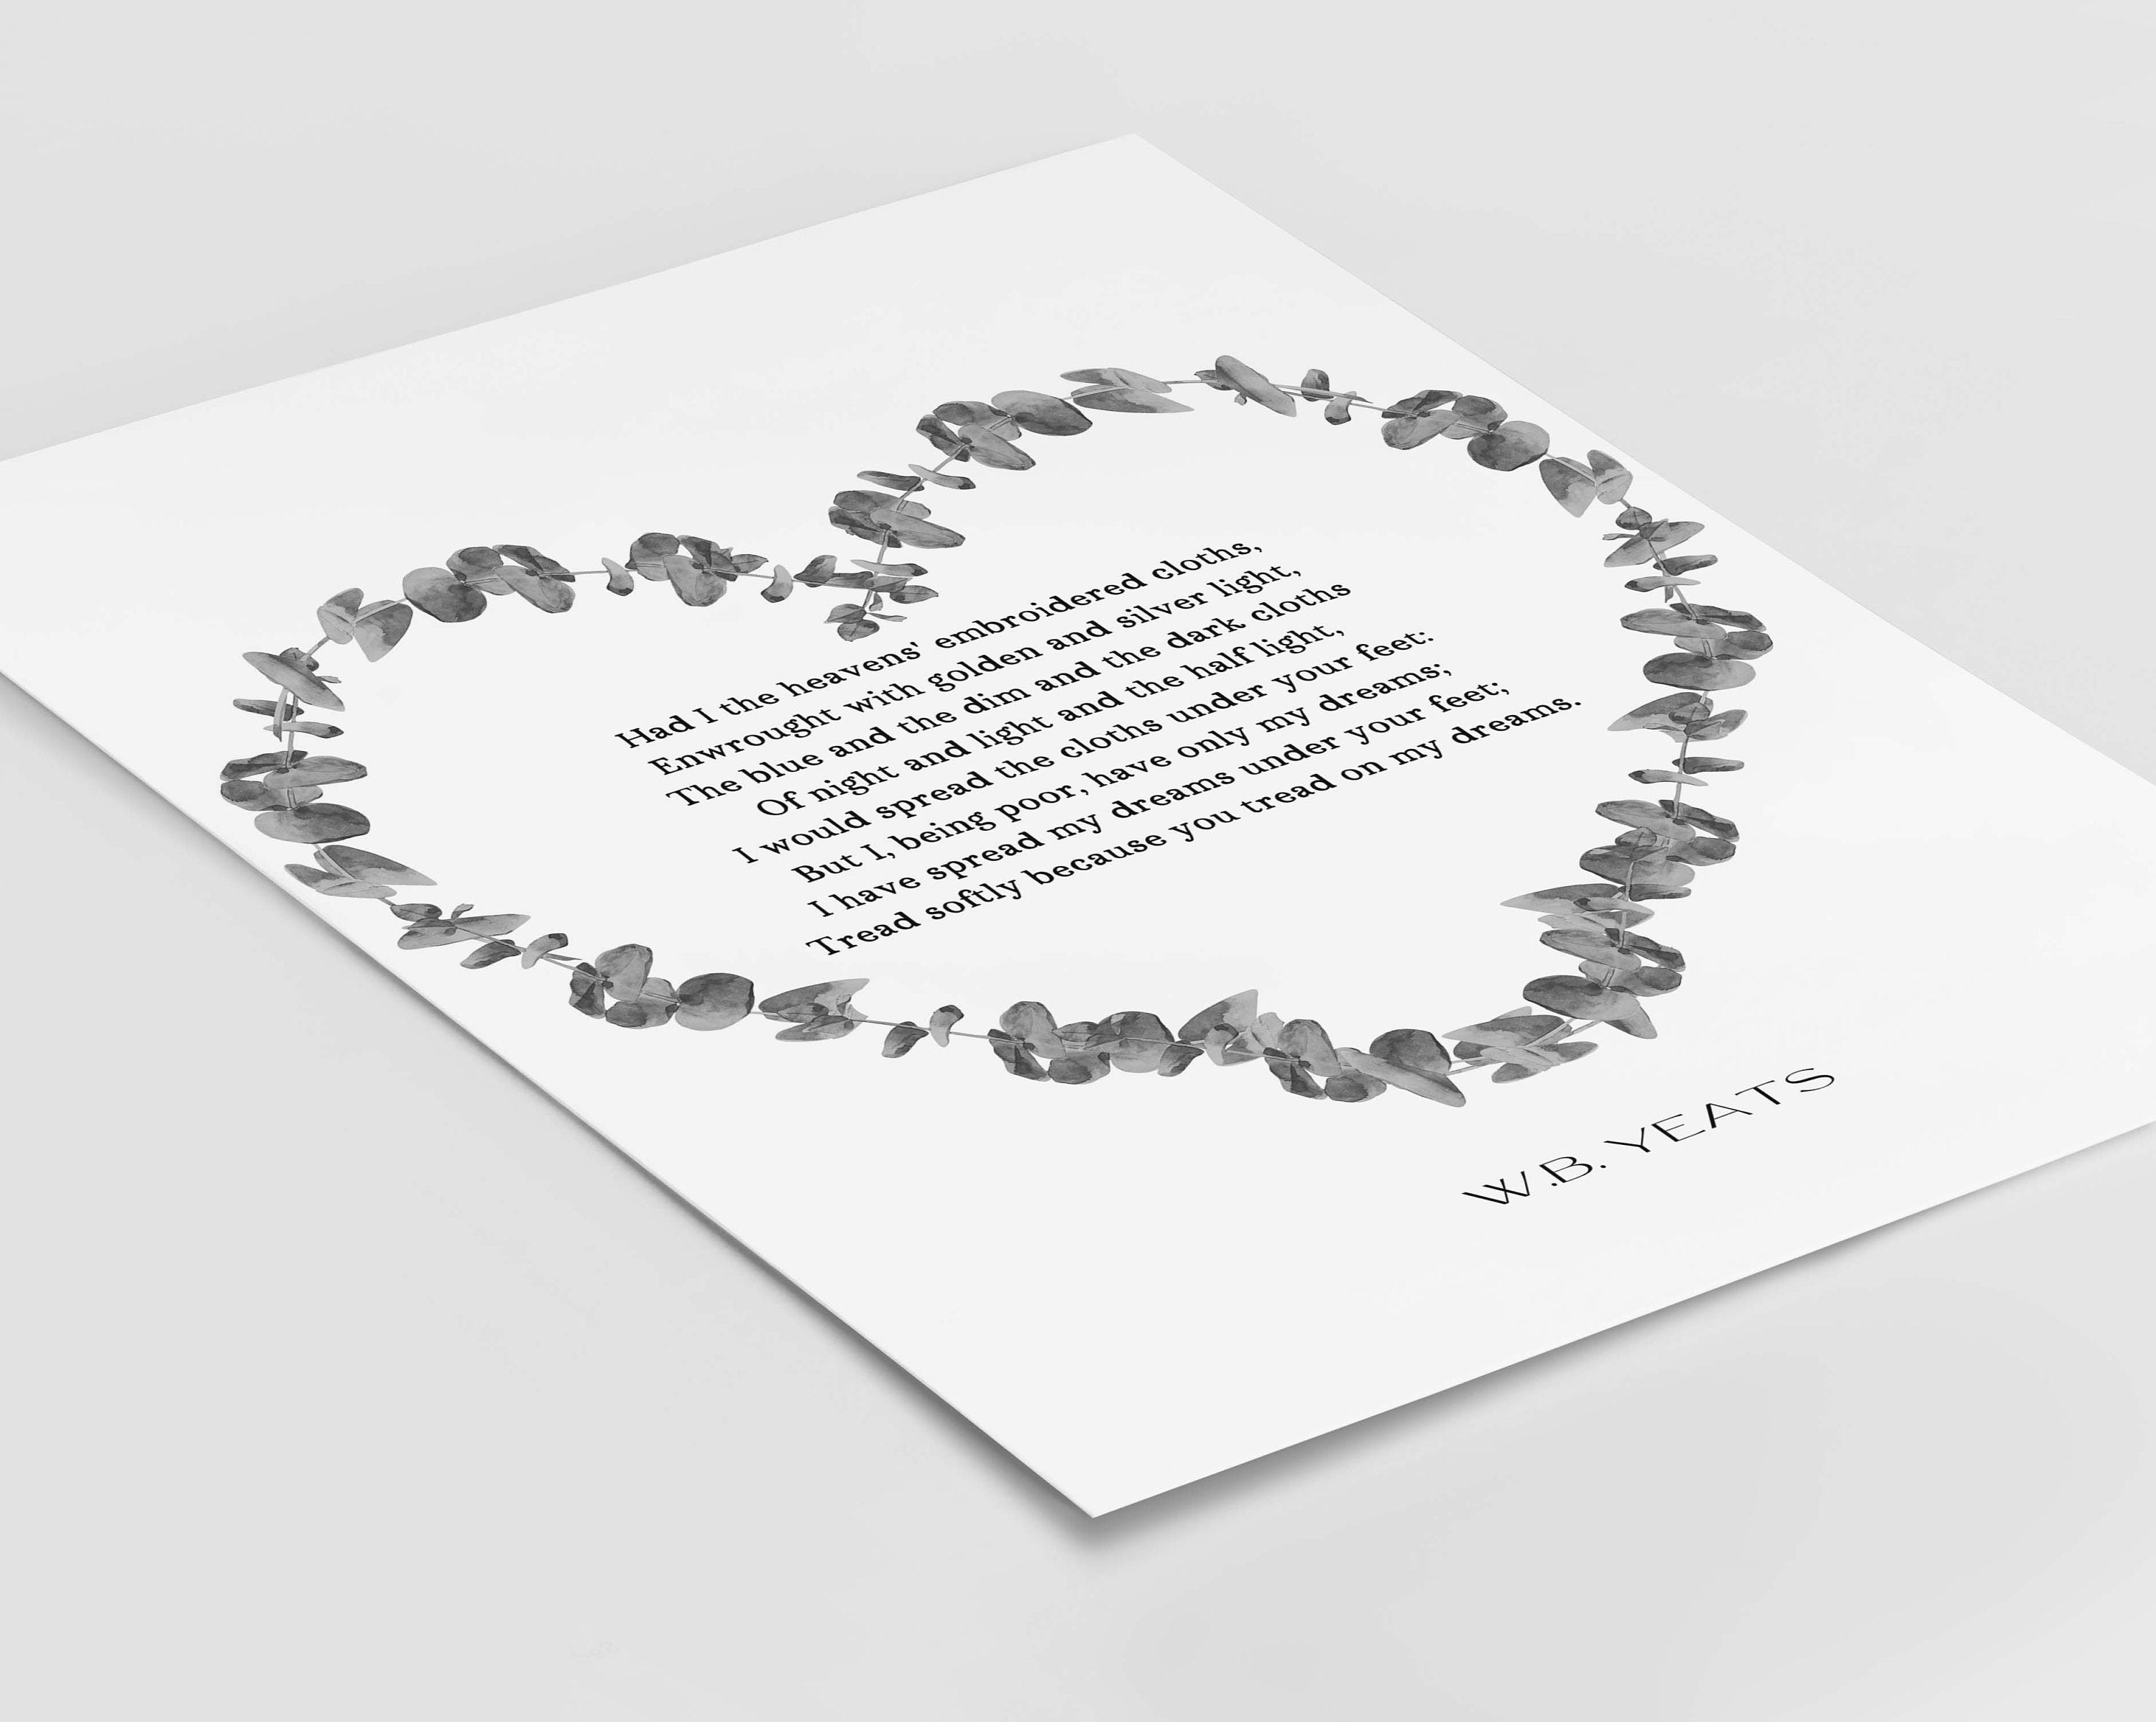 W B Yeats The Cloths Of Heaven Anniversary Gift Love Poem, Unframed and Framed Romantic Wall Print for Bedroom Decor